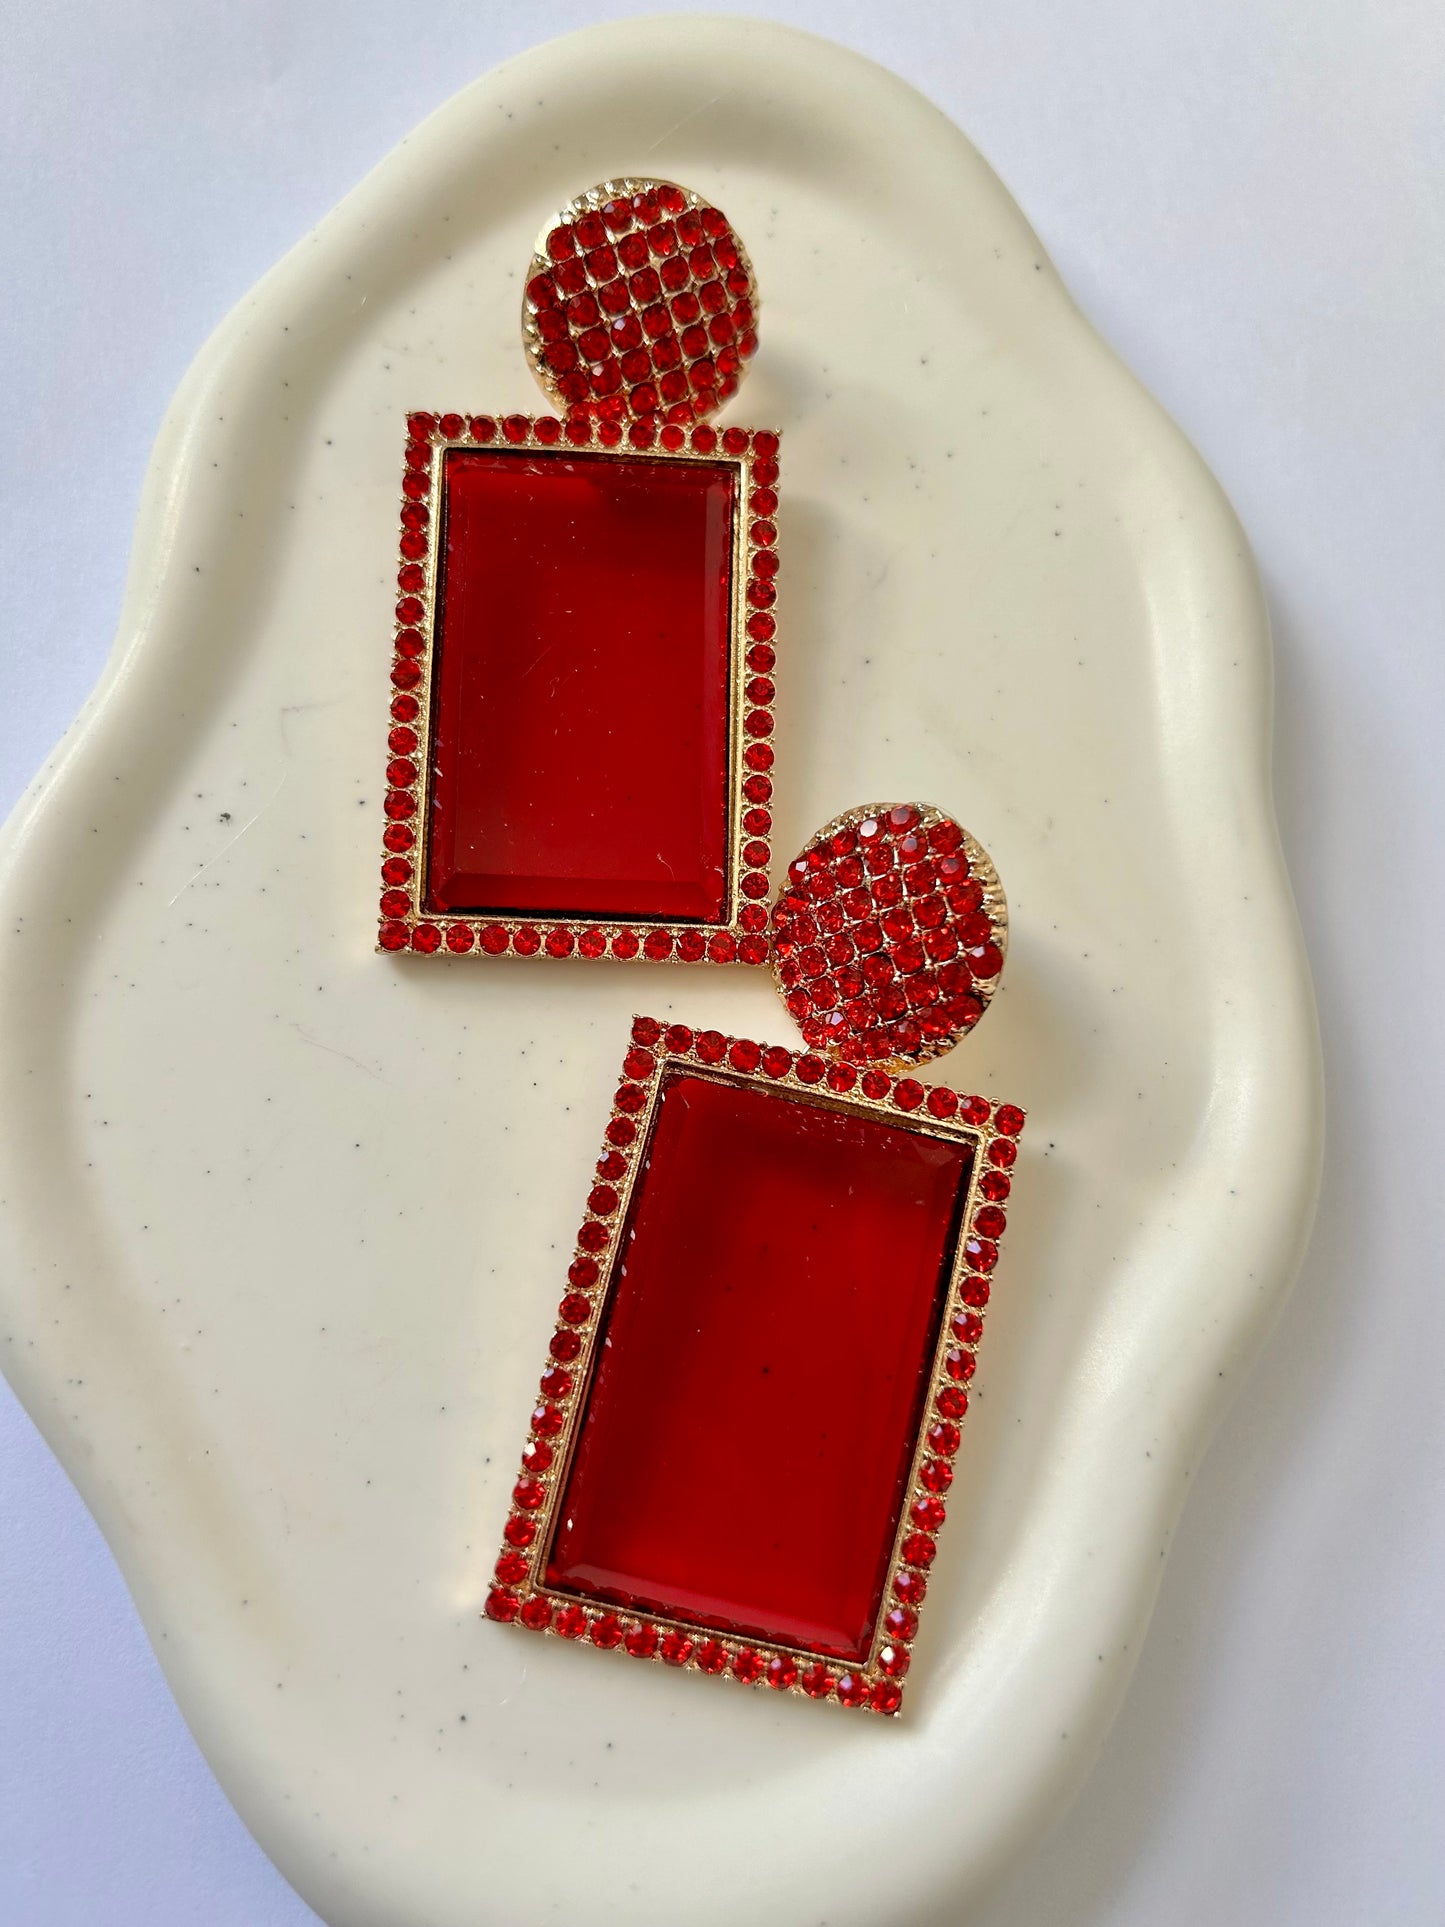 Red Statement Earrings